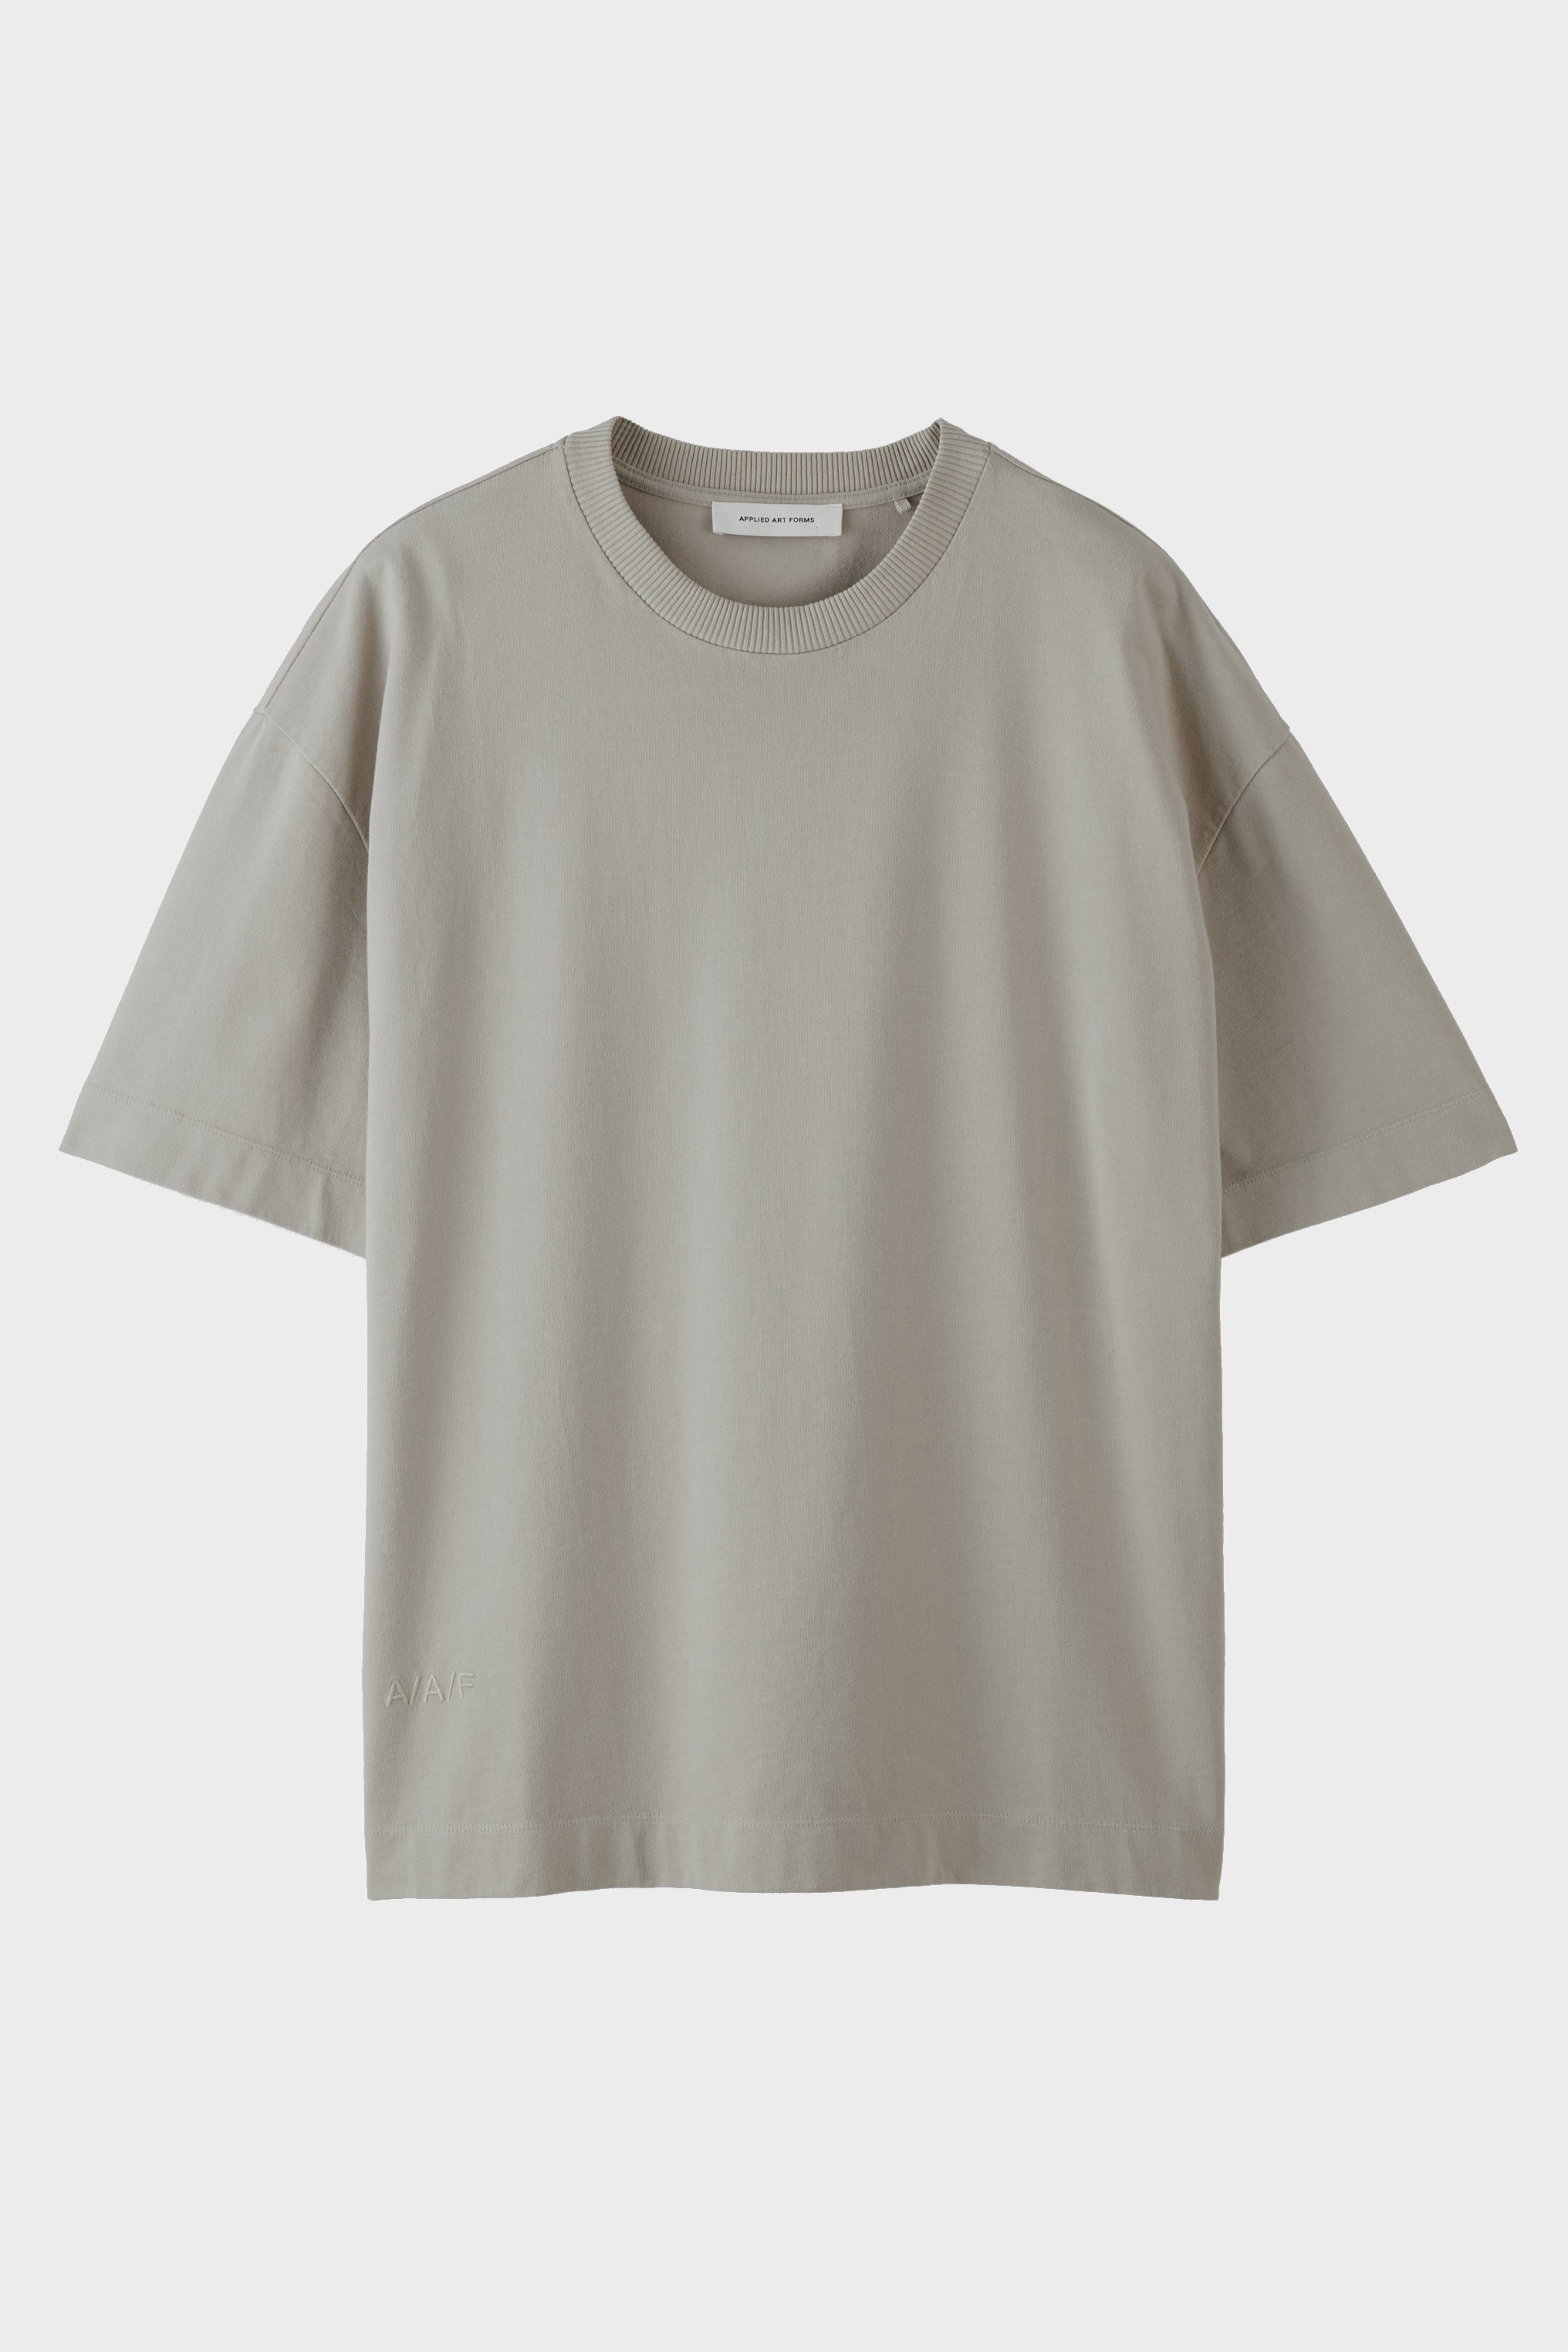 APPLIED ART FORMS Oversize T-Shirt in Ghost Grey XXL